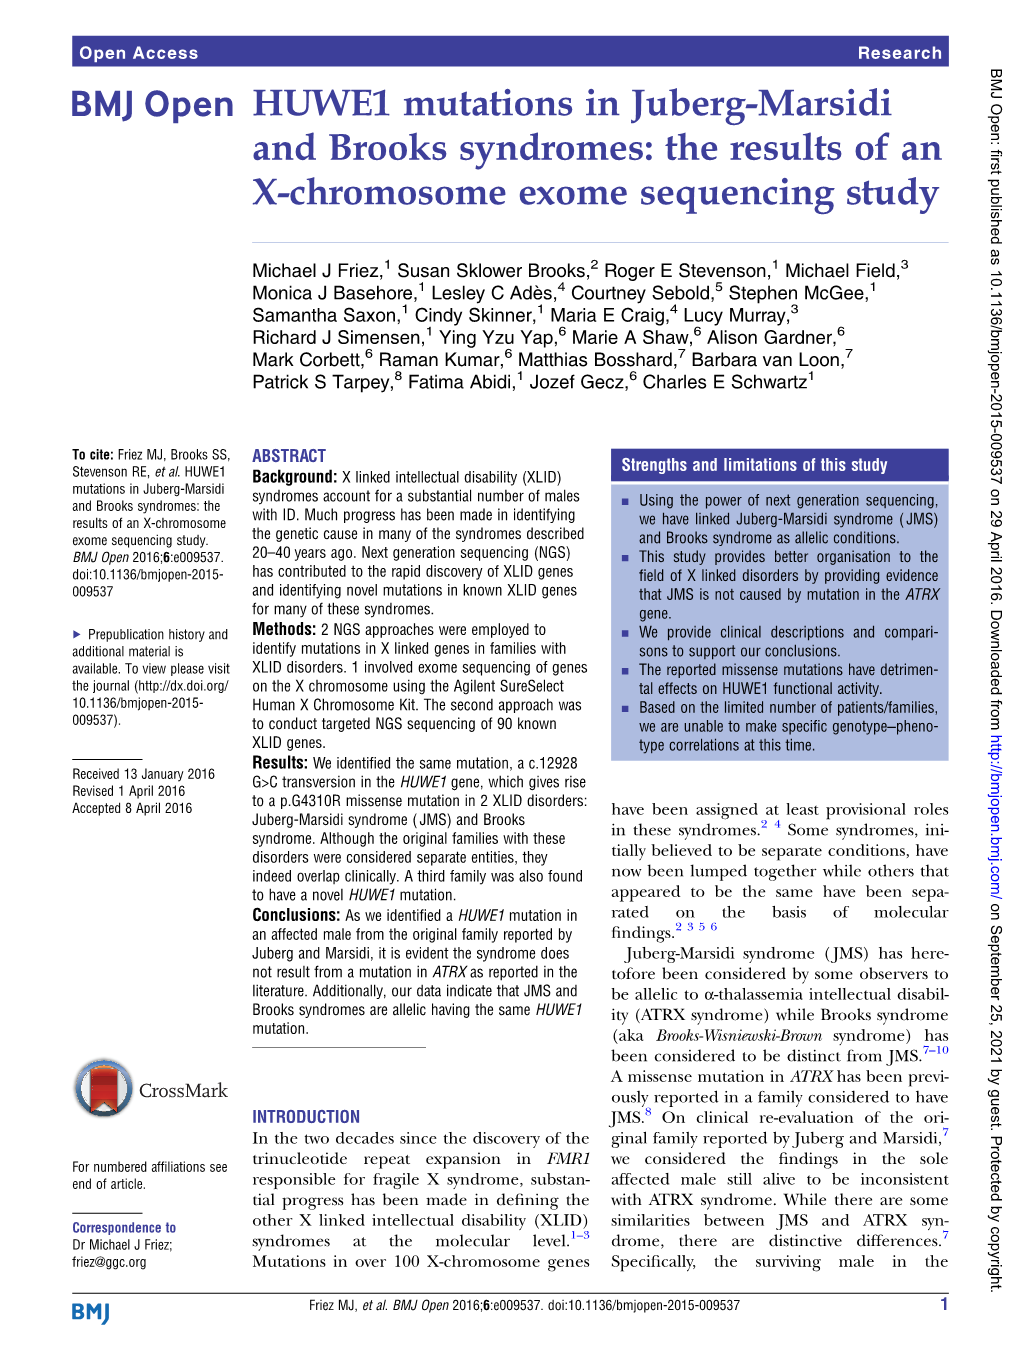 HUWE1 Mutations in Juberg-Marsidi and Brooks Syndromes: the Results of an X-Chromosome Exome Sequencing Study